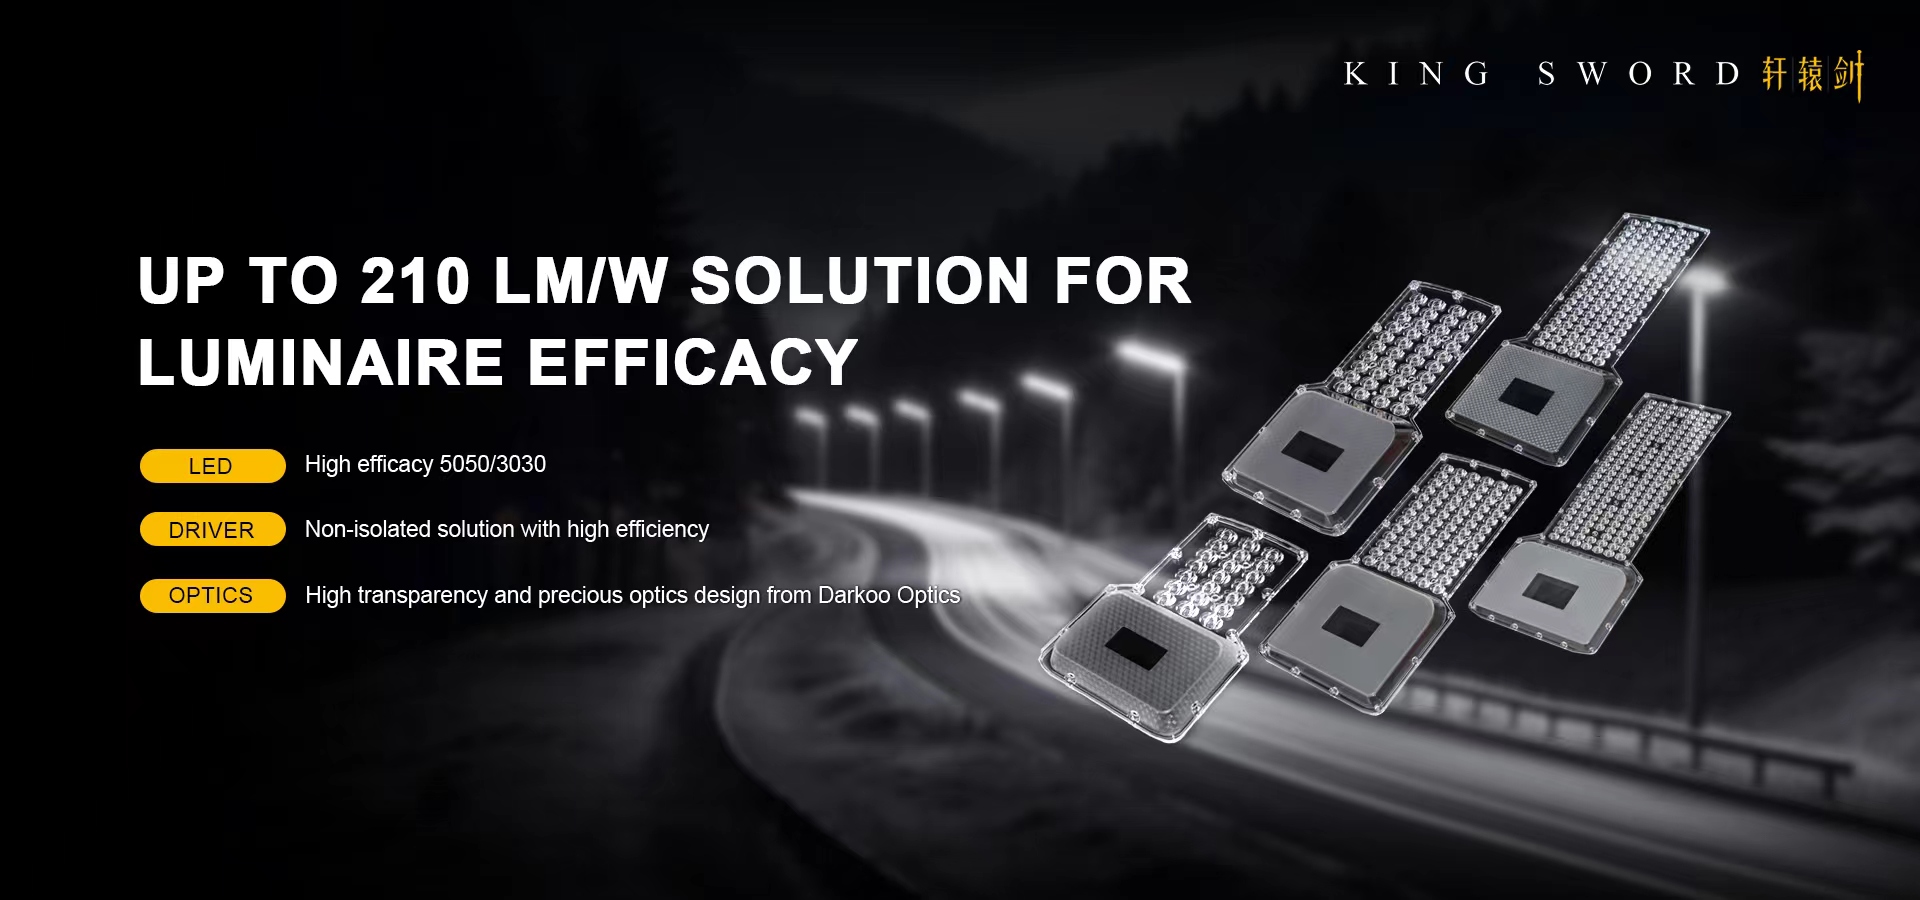 UP TO 200 LM/W SOLUTION FOR LUMINAIRE EFFICACY